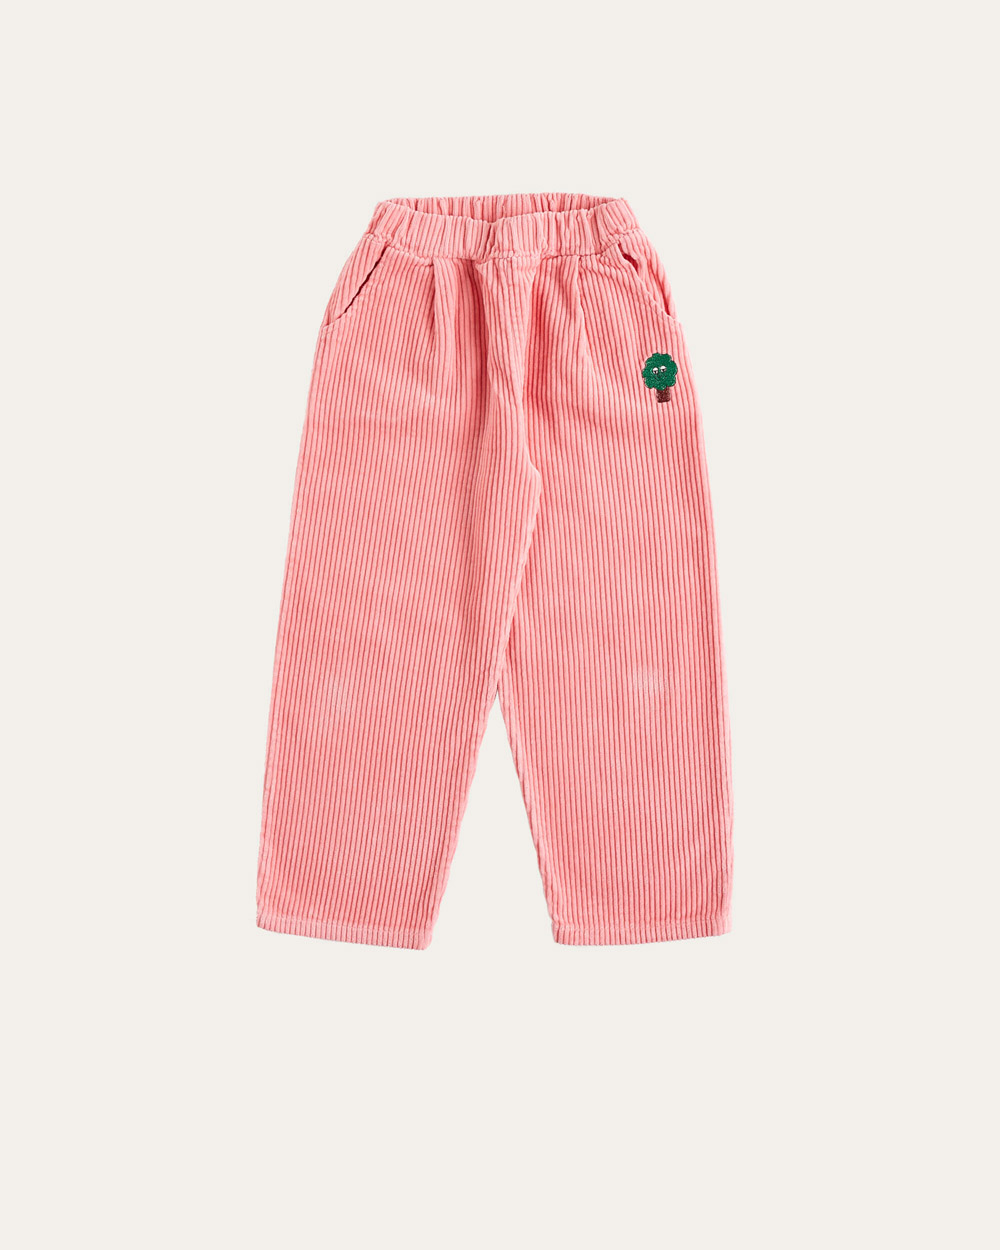 [THE CAMPAMENTO]Pink Corduroy Trousers [7-8Y]